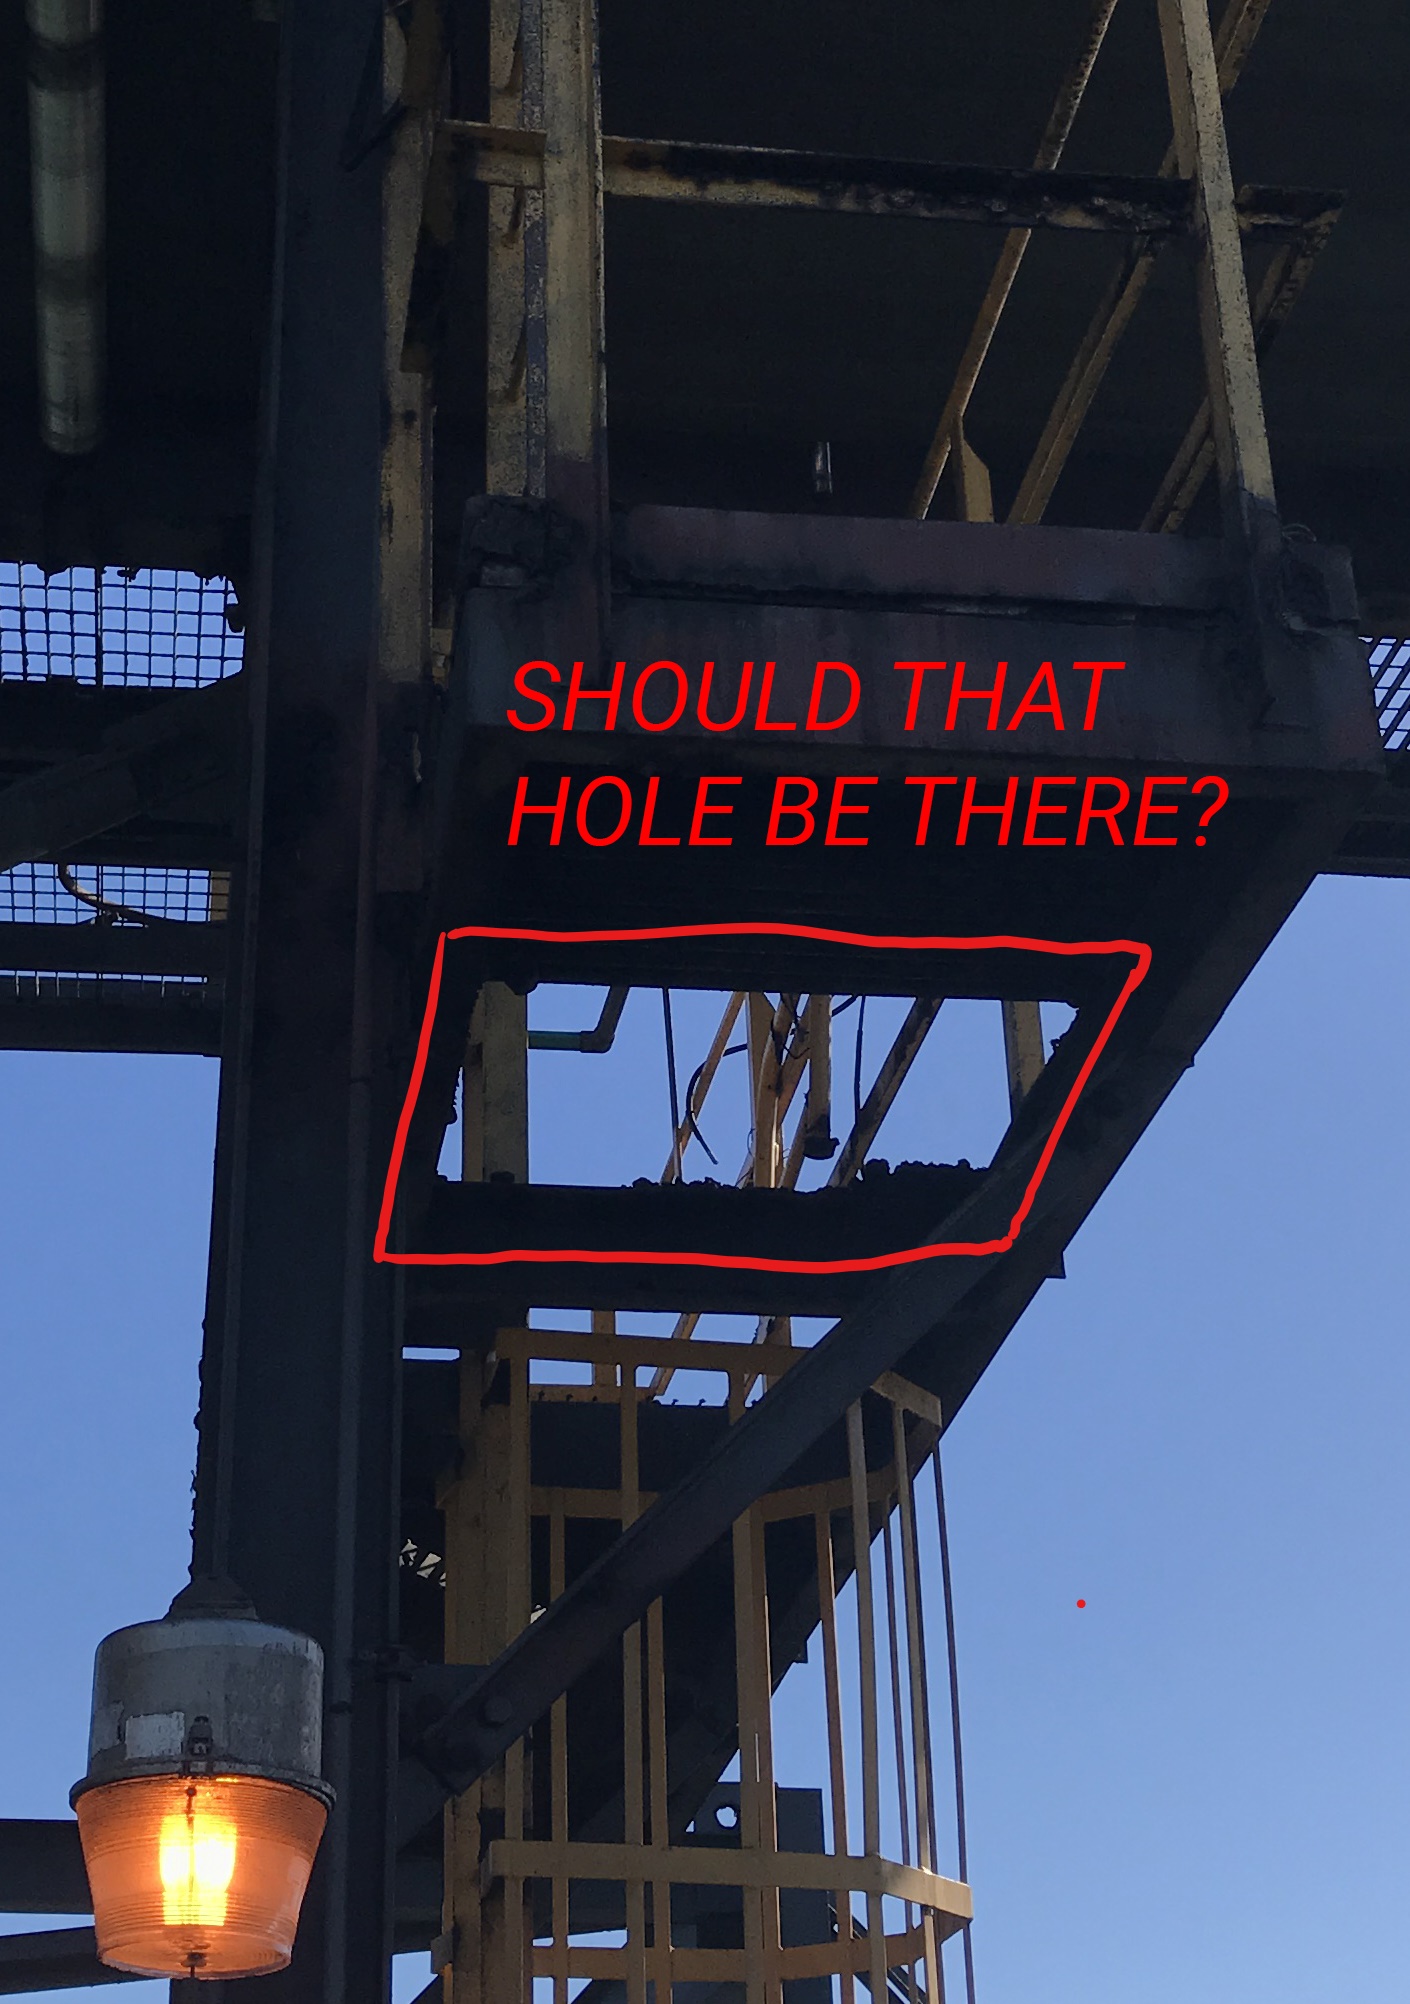 Should that hole be there?